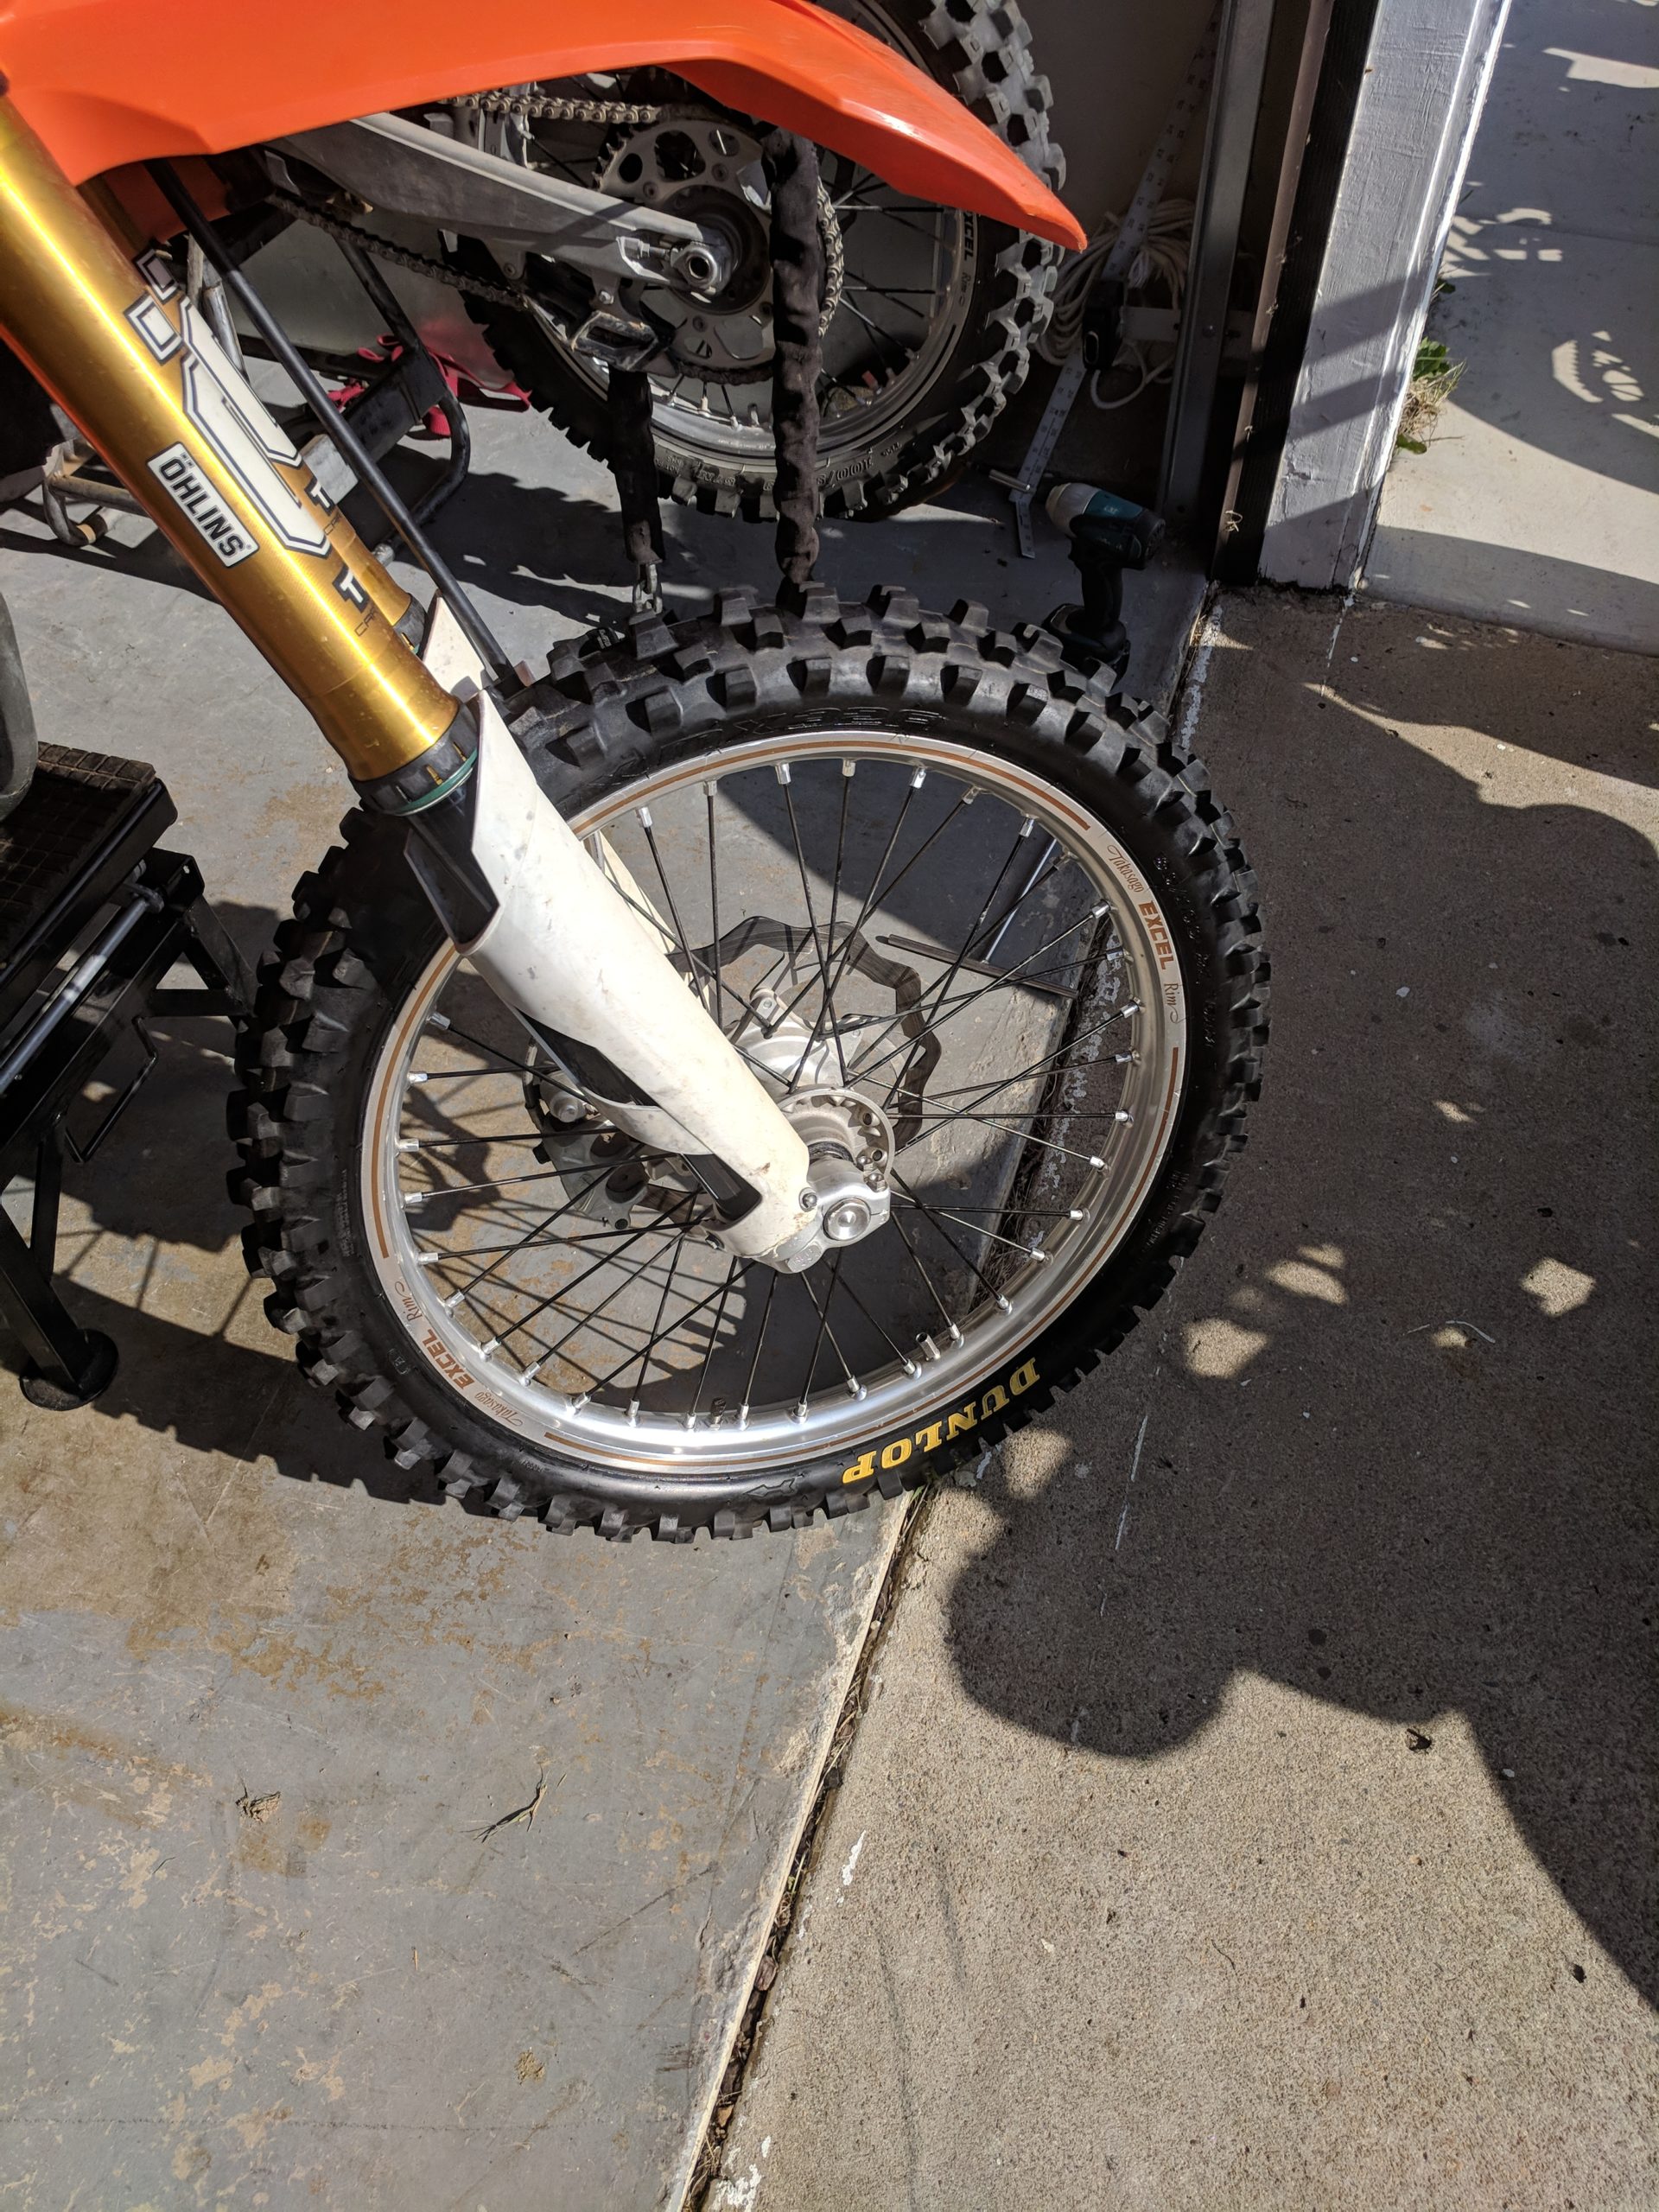 removing front tire from bike